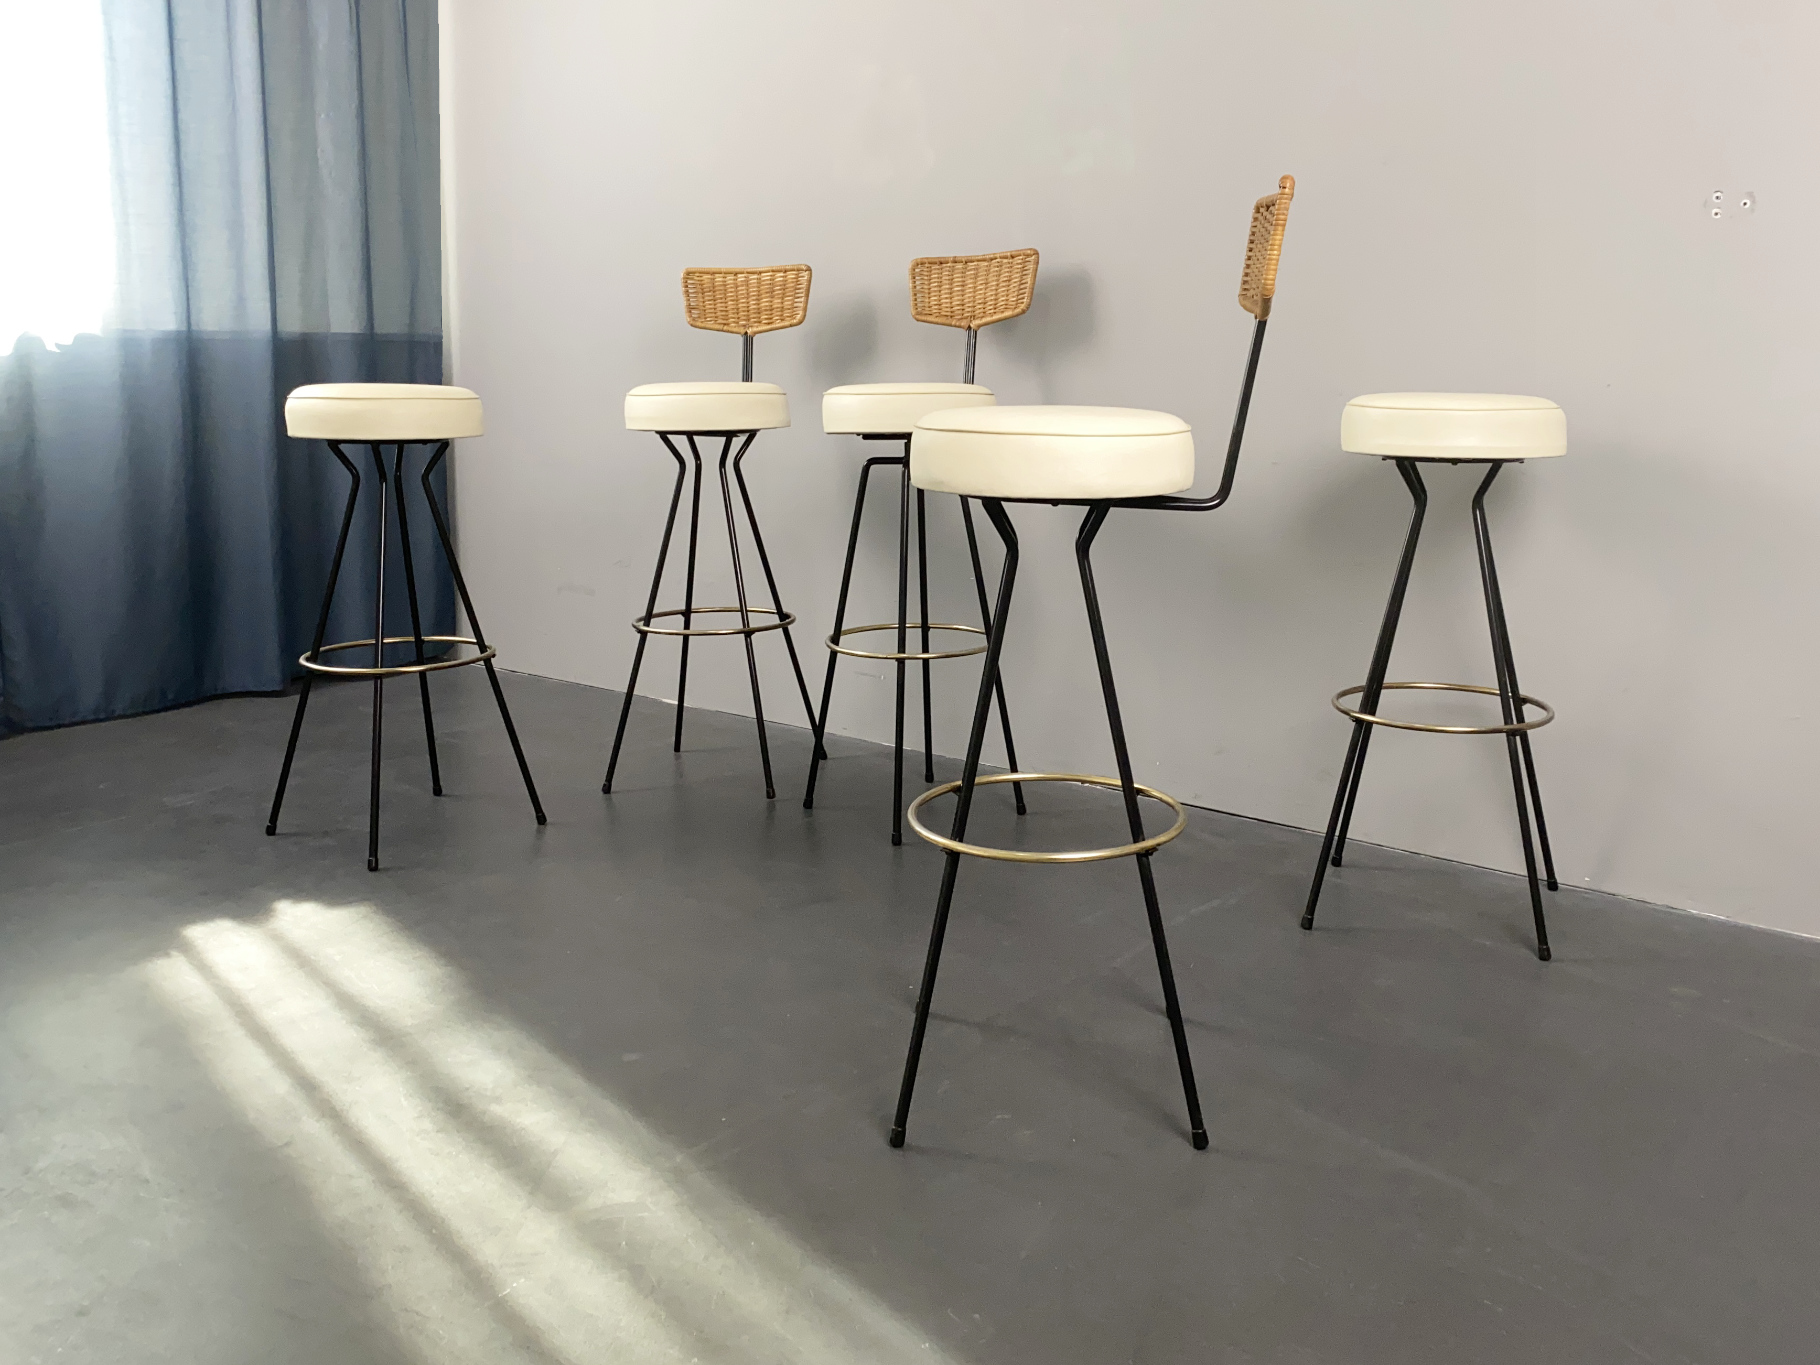 Set of 5  Bar Stools, 3x with Wickerwork Back Rest (thereof 1x rotatable) by Herta Maria Witzemann for Erwin Behr, Germany, 1950s